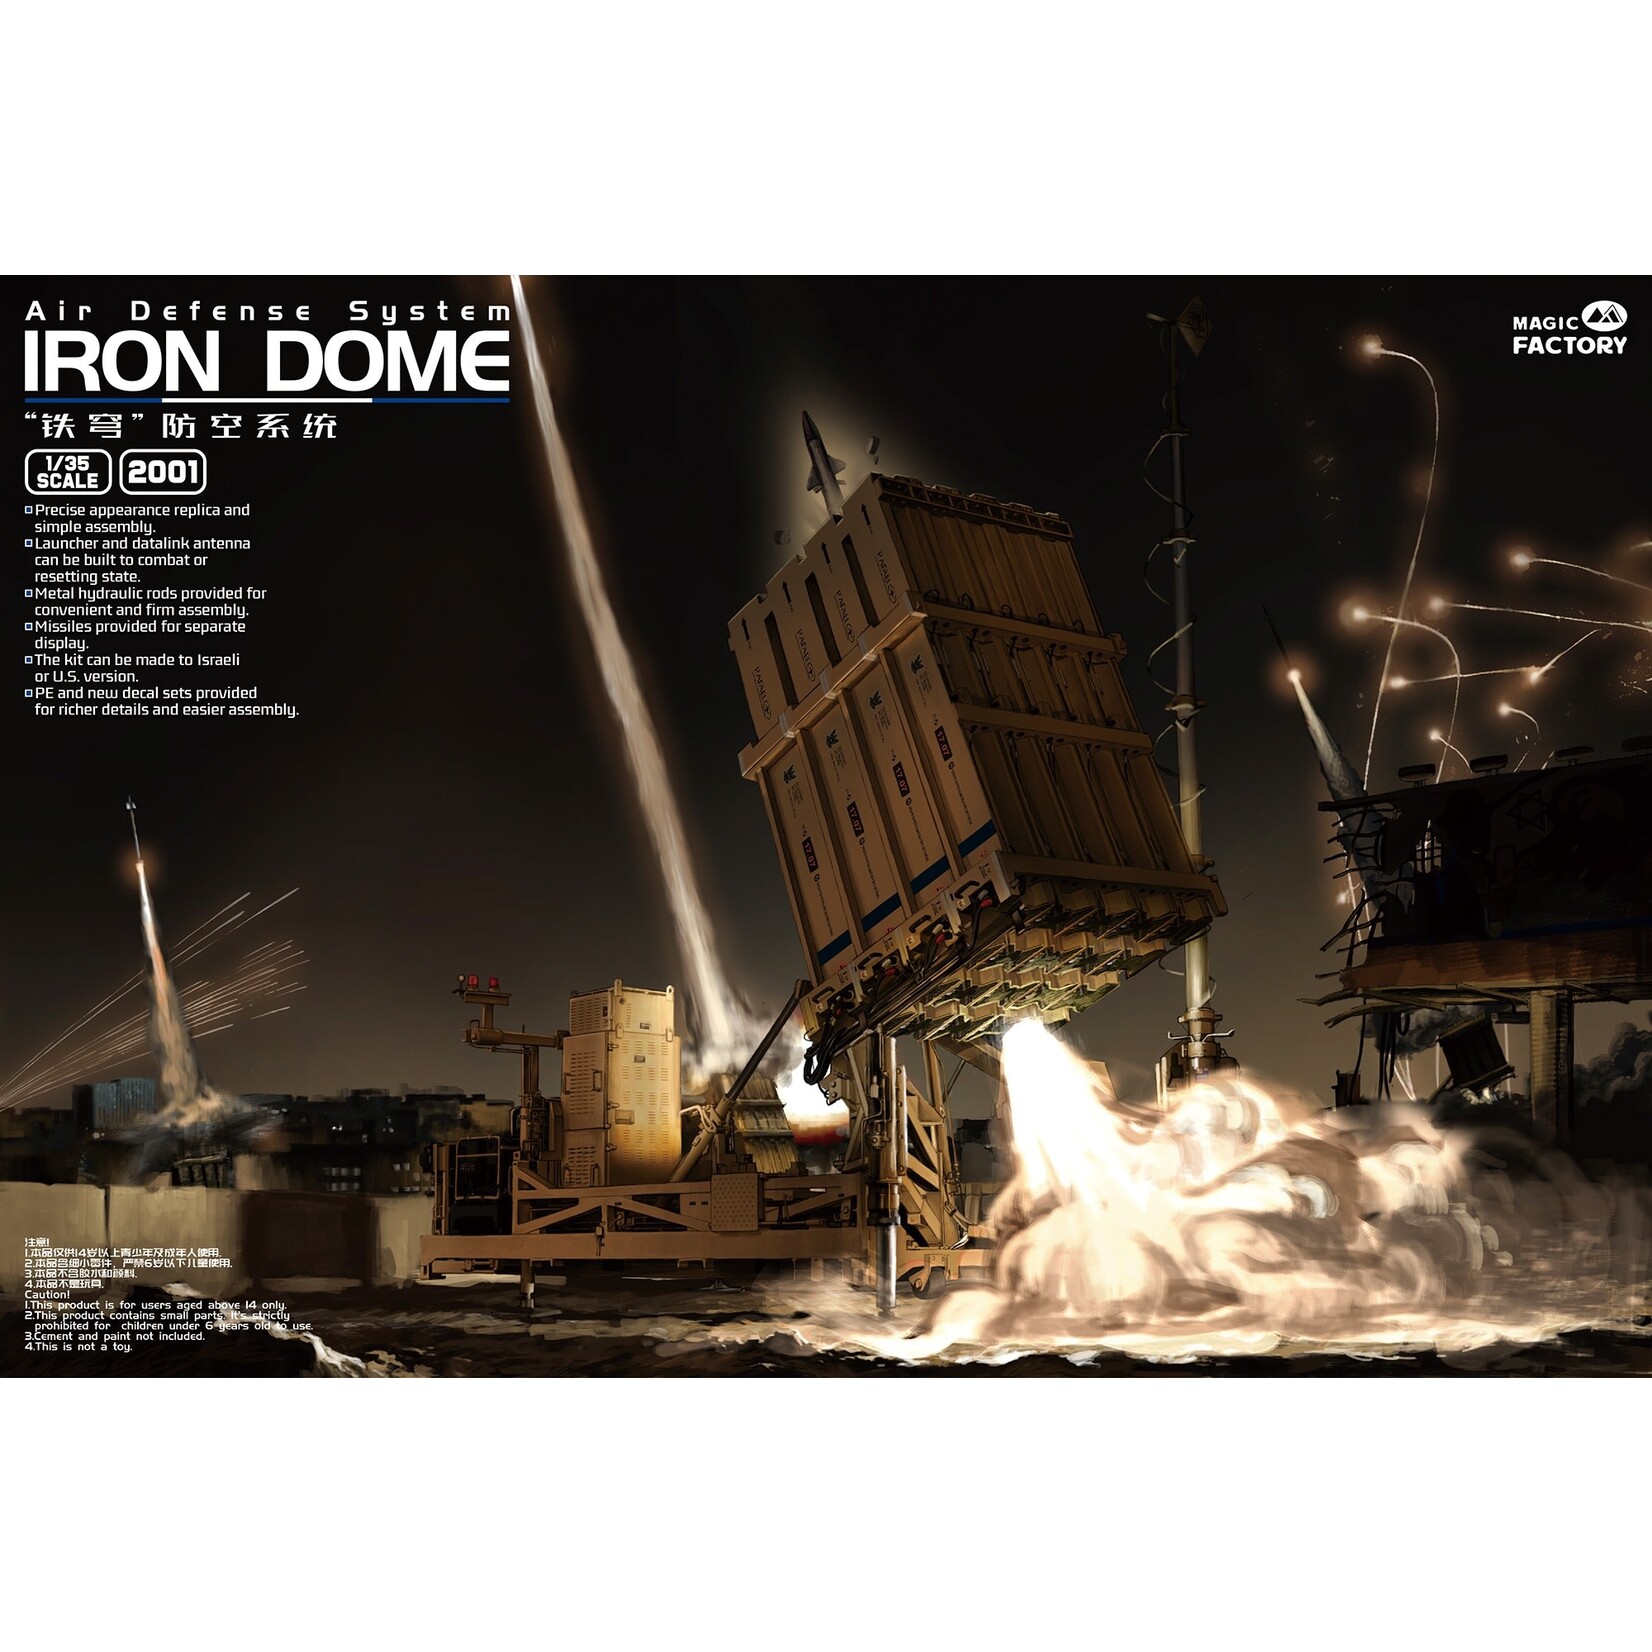 Magic Factory MFY2001 Air Defense System Iron Dome (1/35)